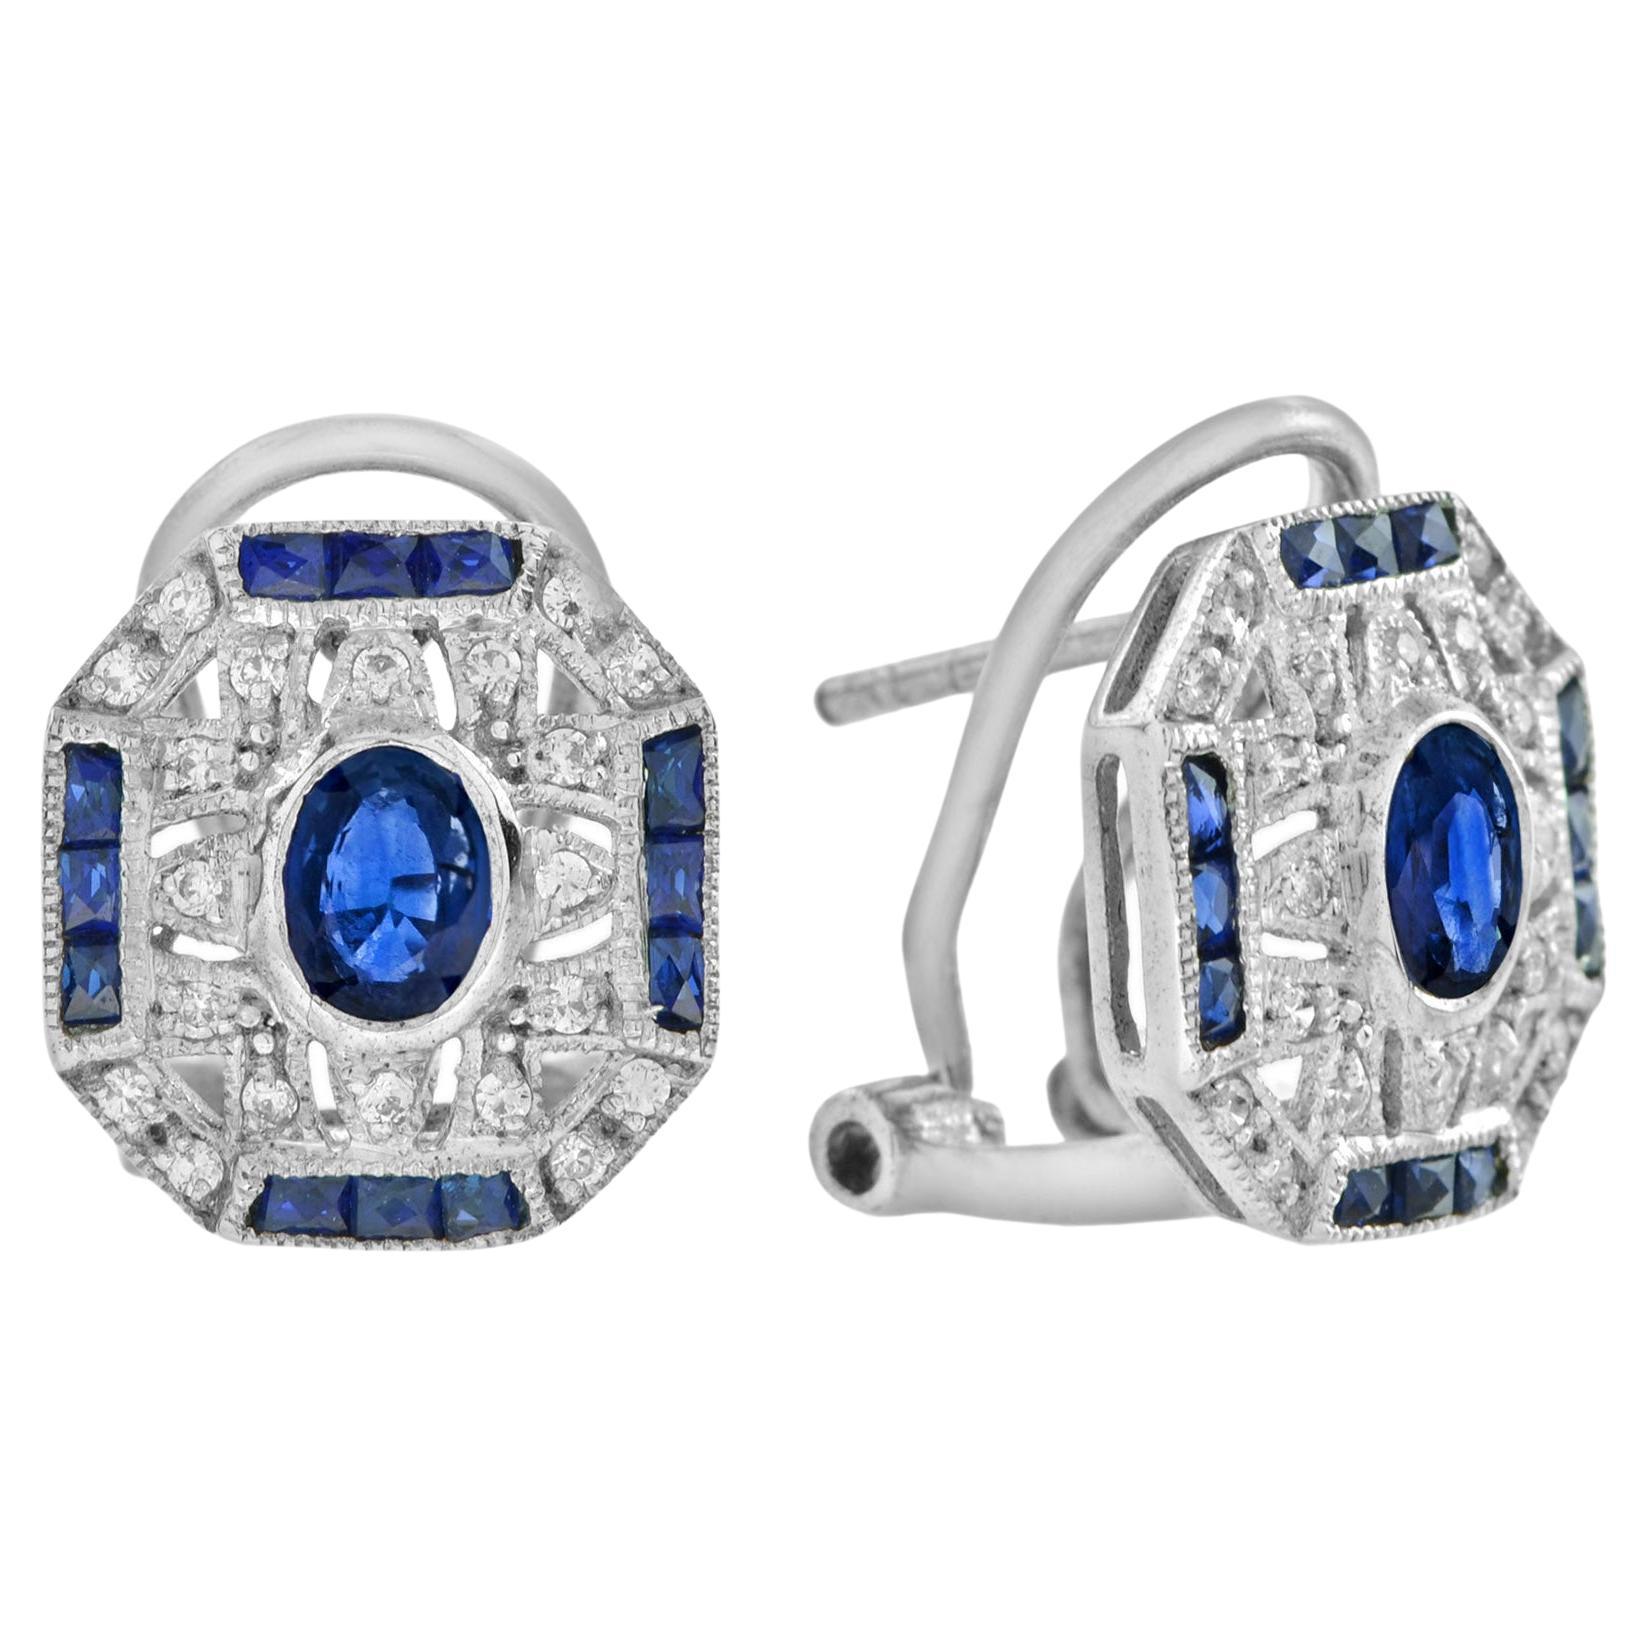 Oval Ceylon Sapphire and Diamond Stud Earrings in 14K White Gold For Sale